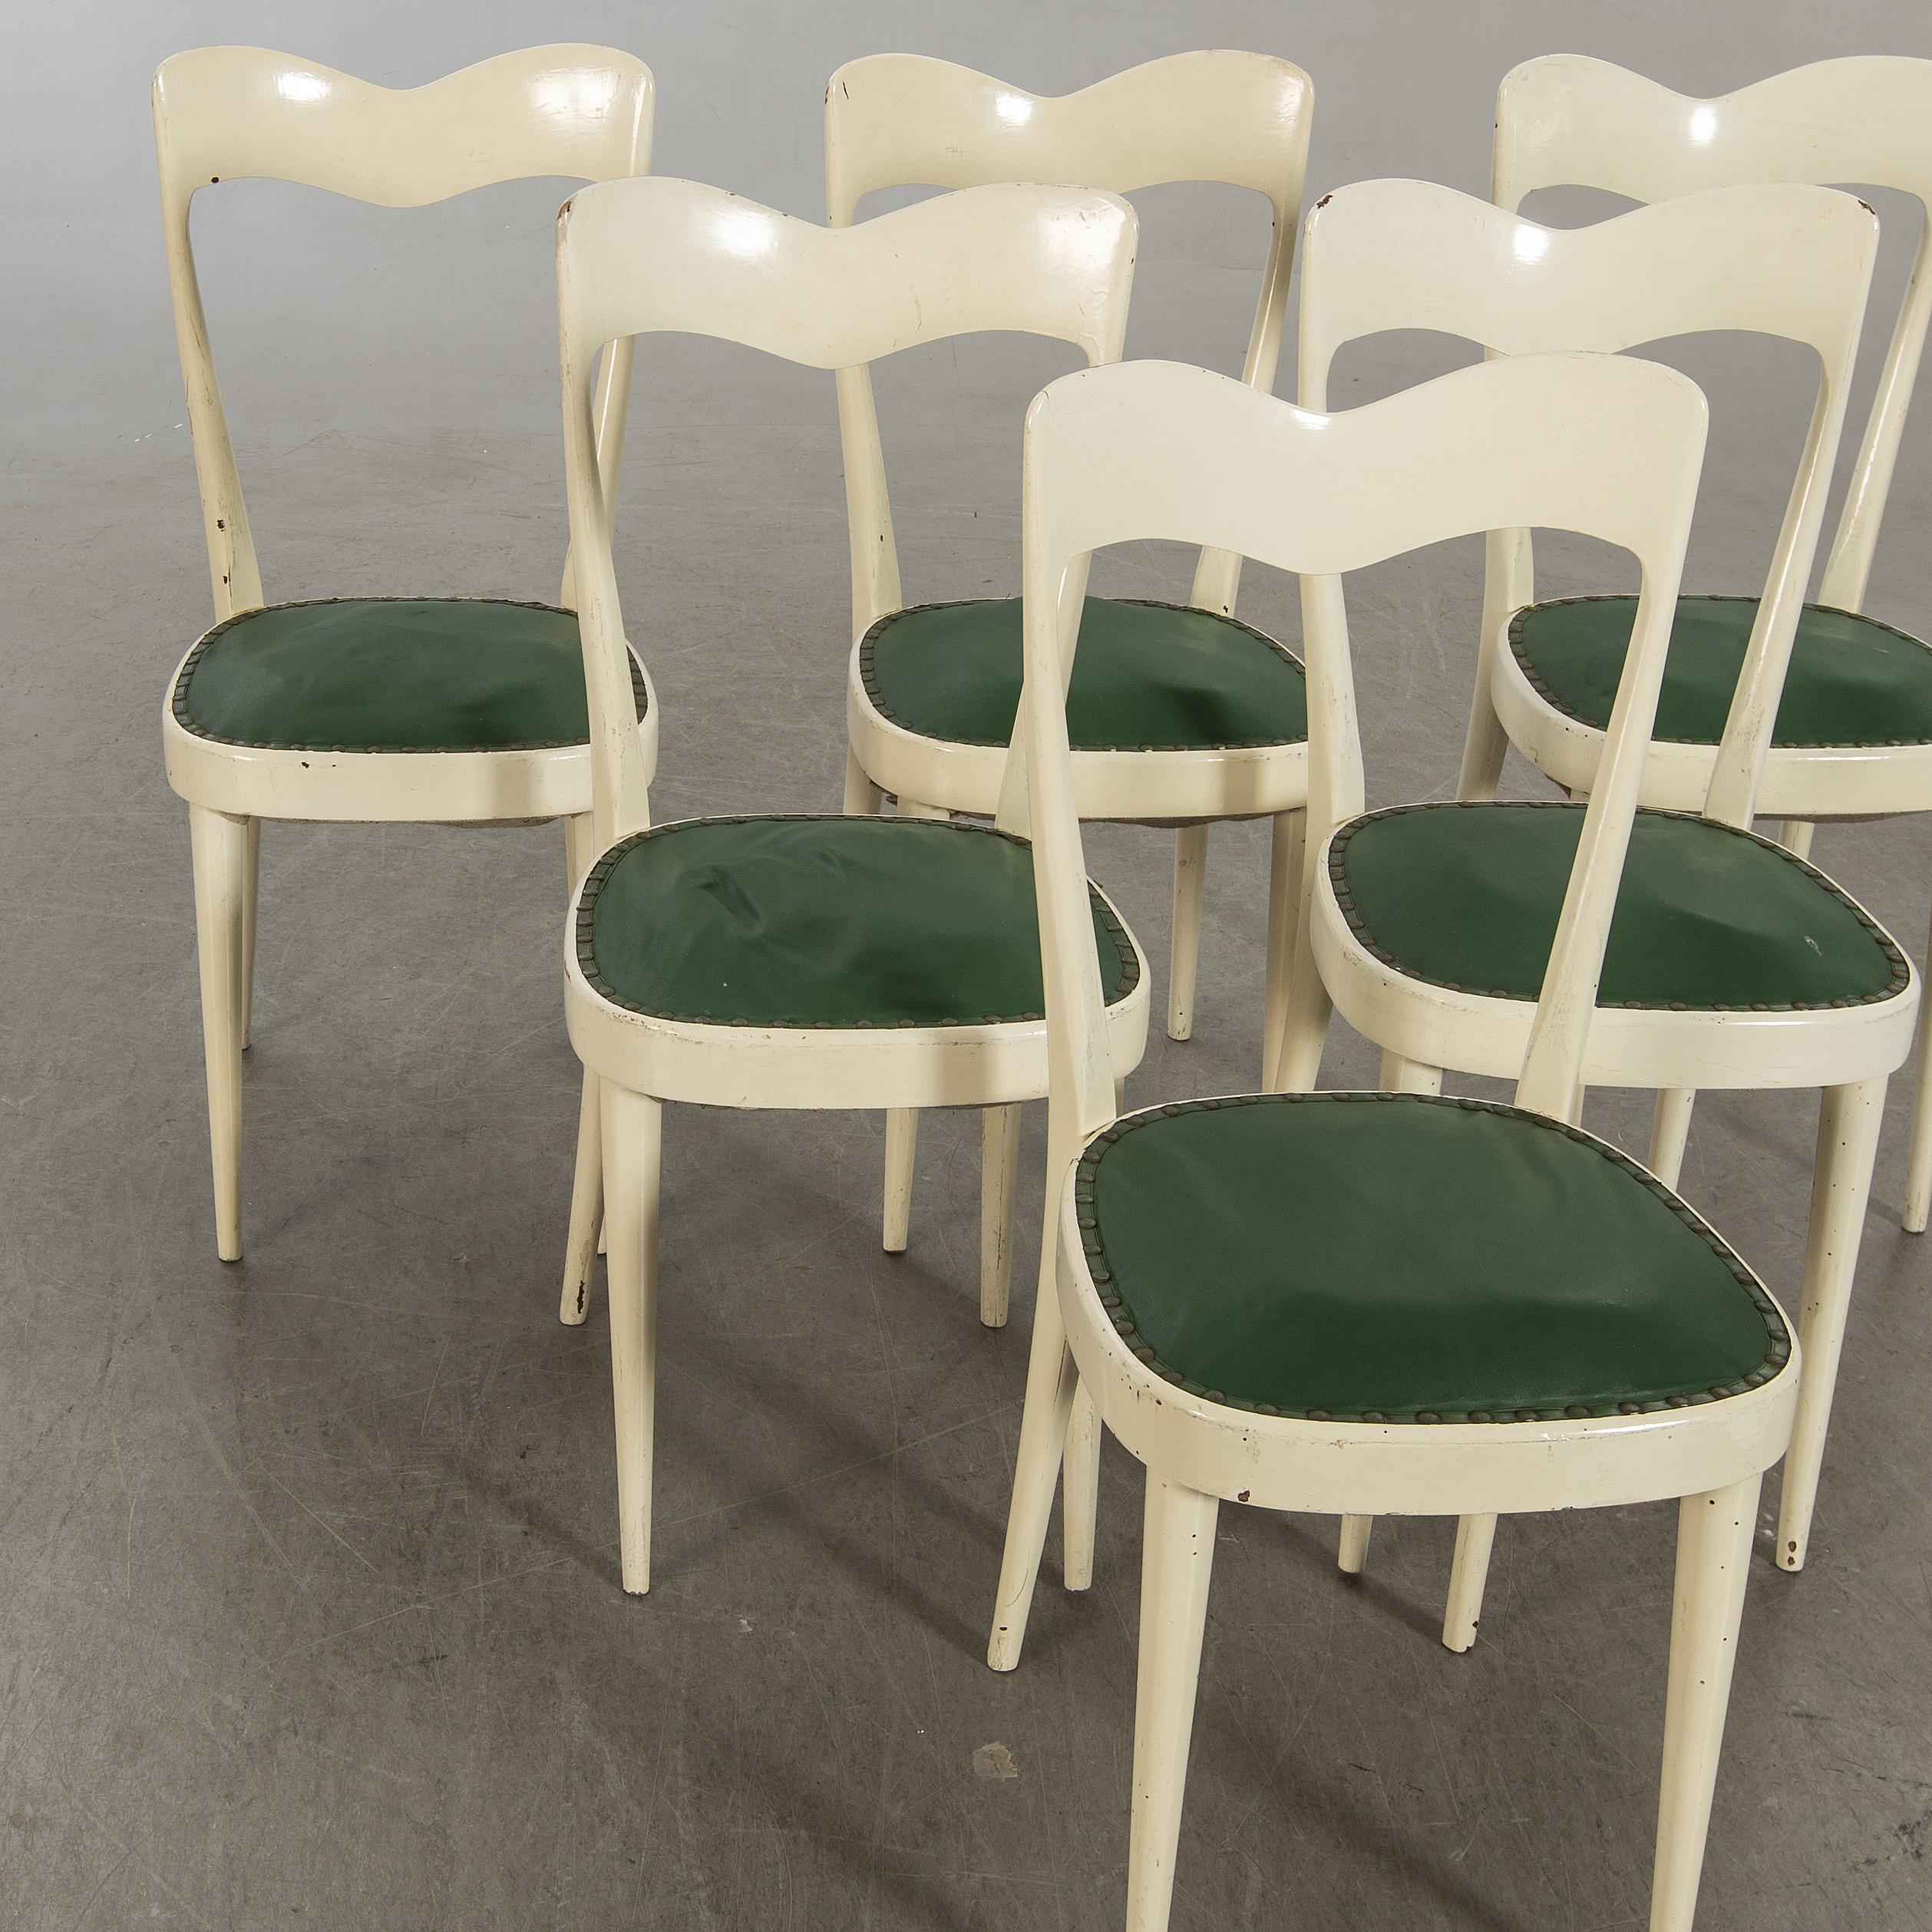 European Set of 6 Mid Century Dining Chairs with Green Seats For Sale